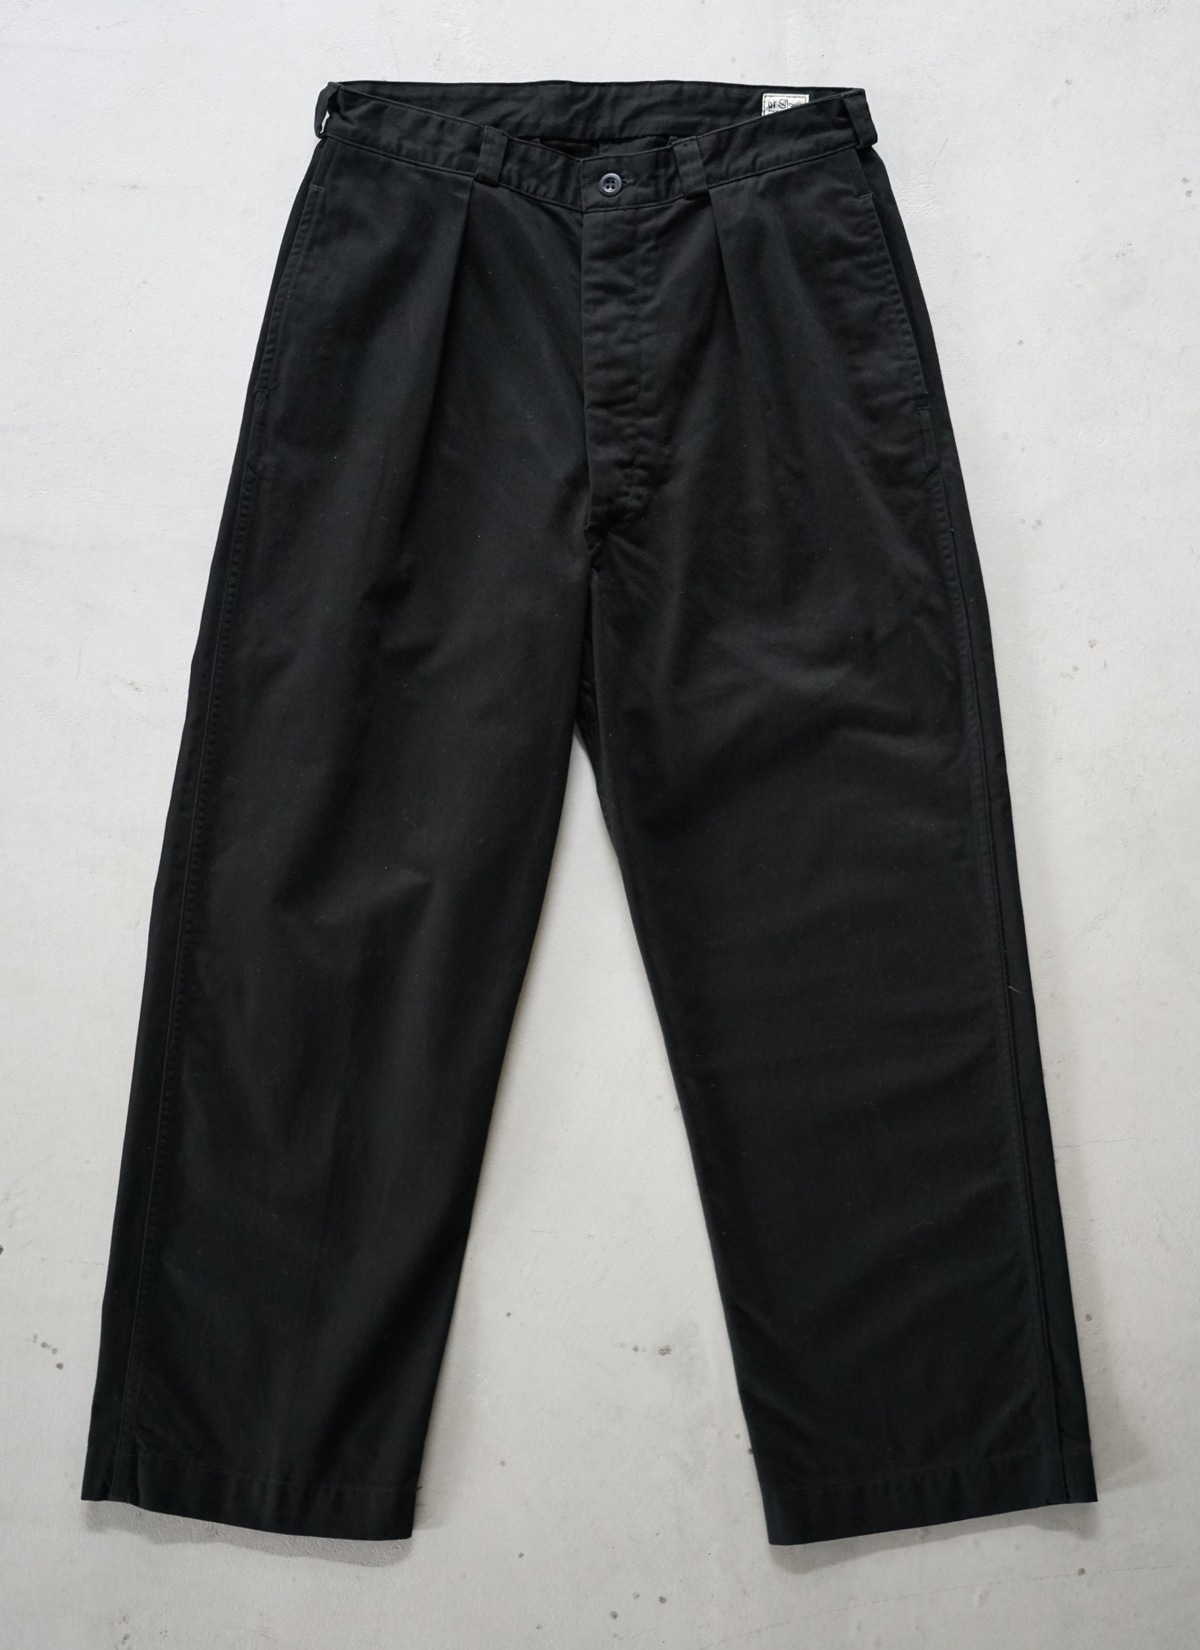 M-52 French Army Trouser Black